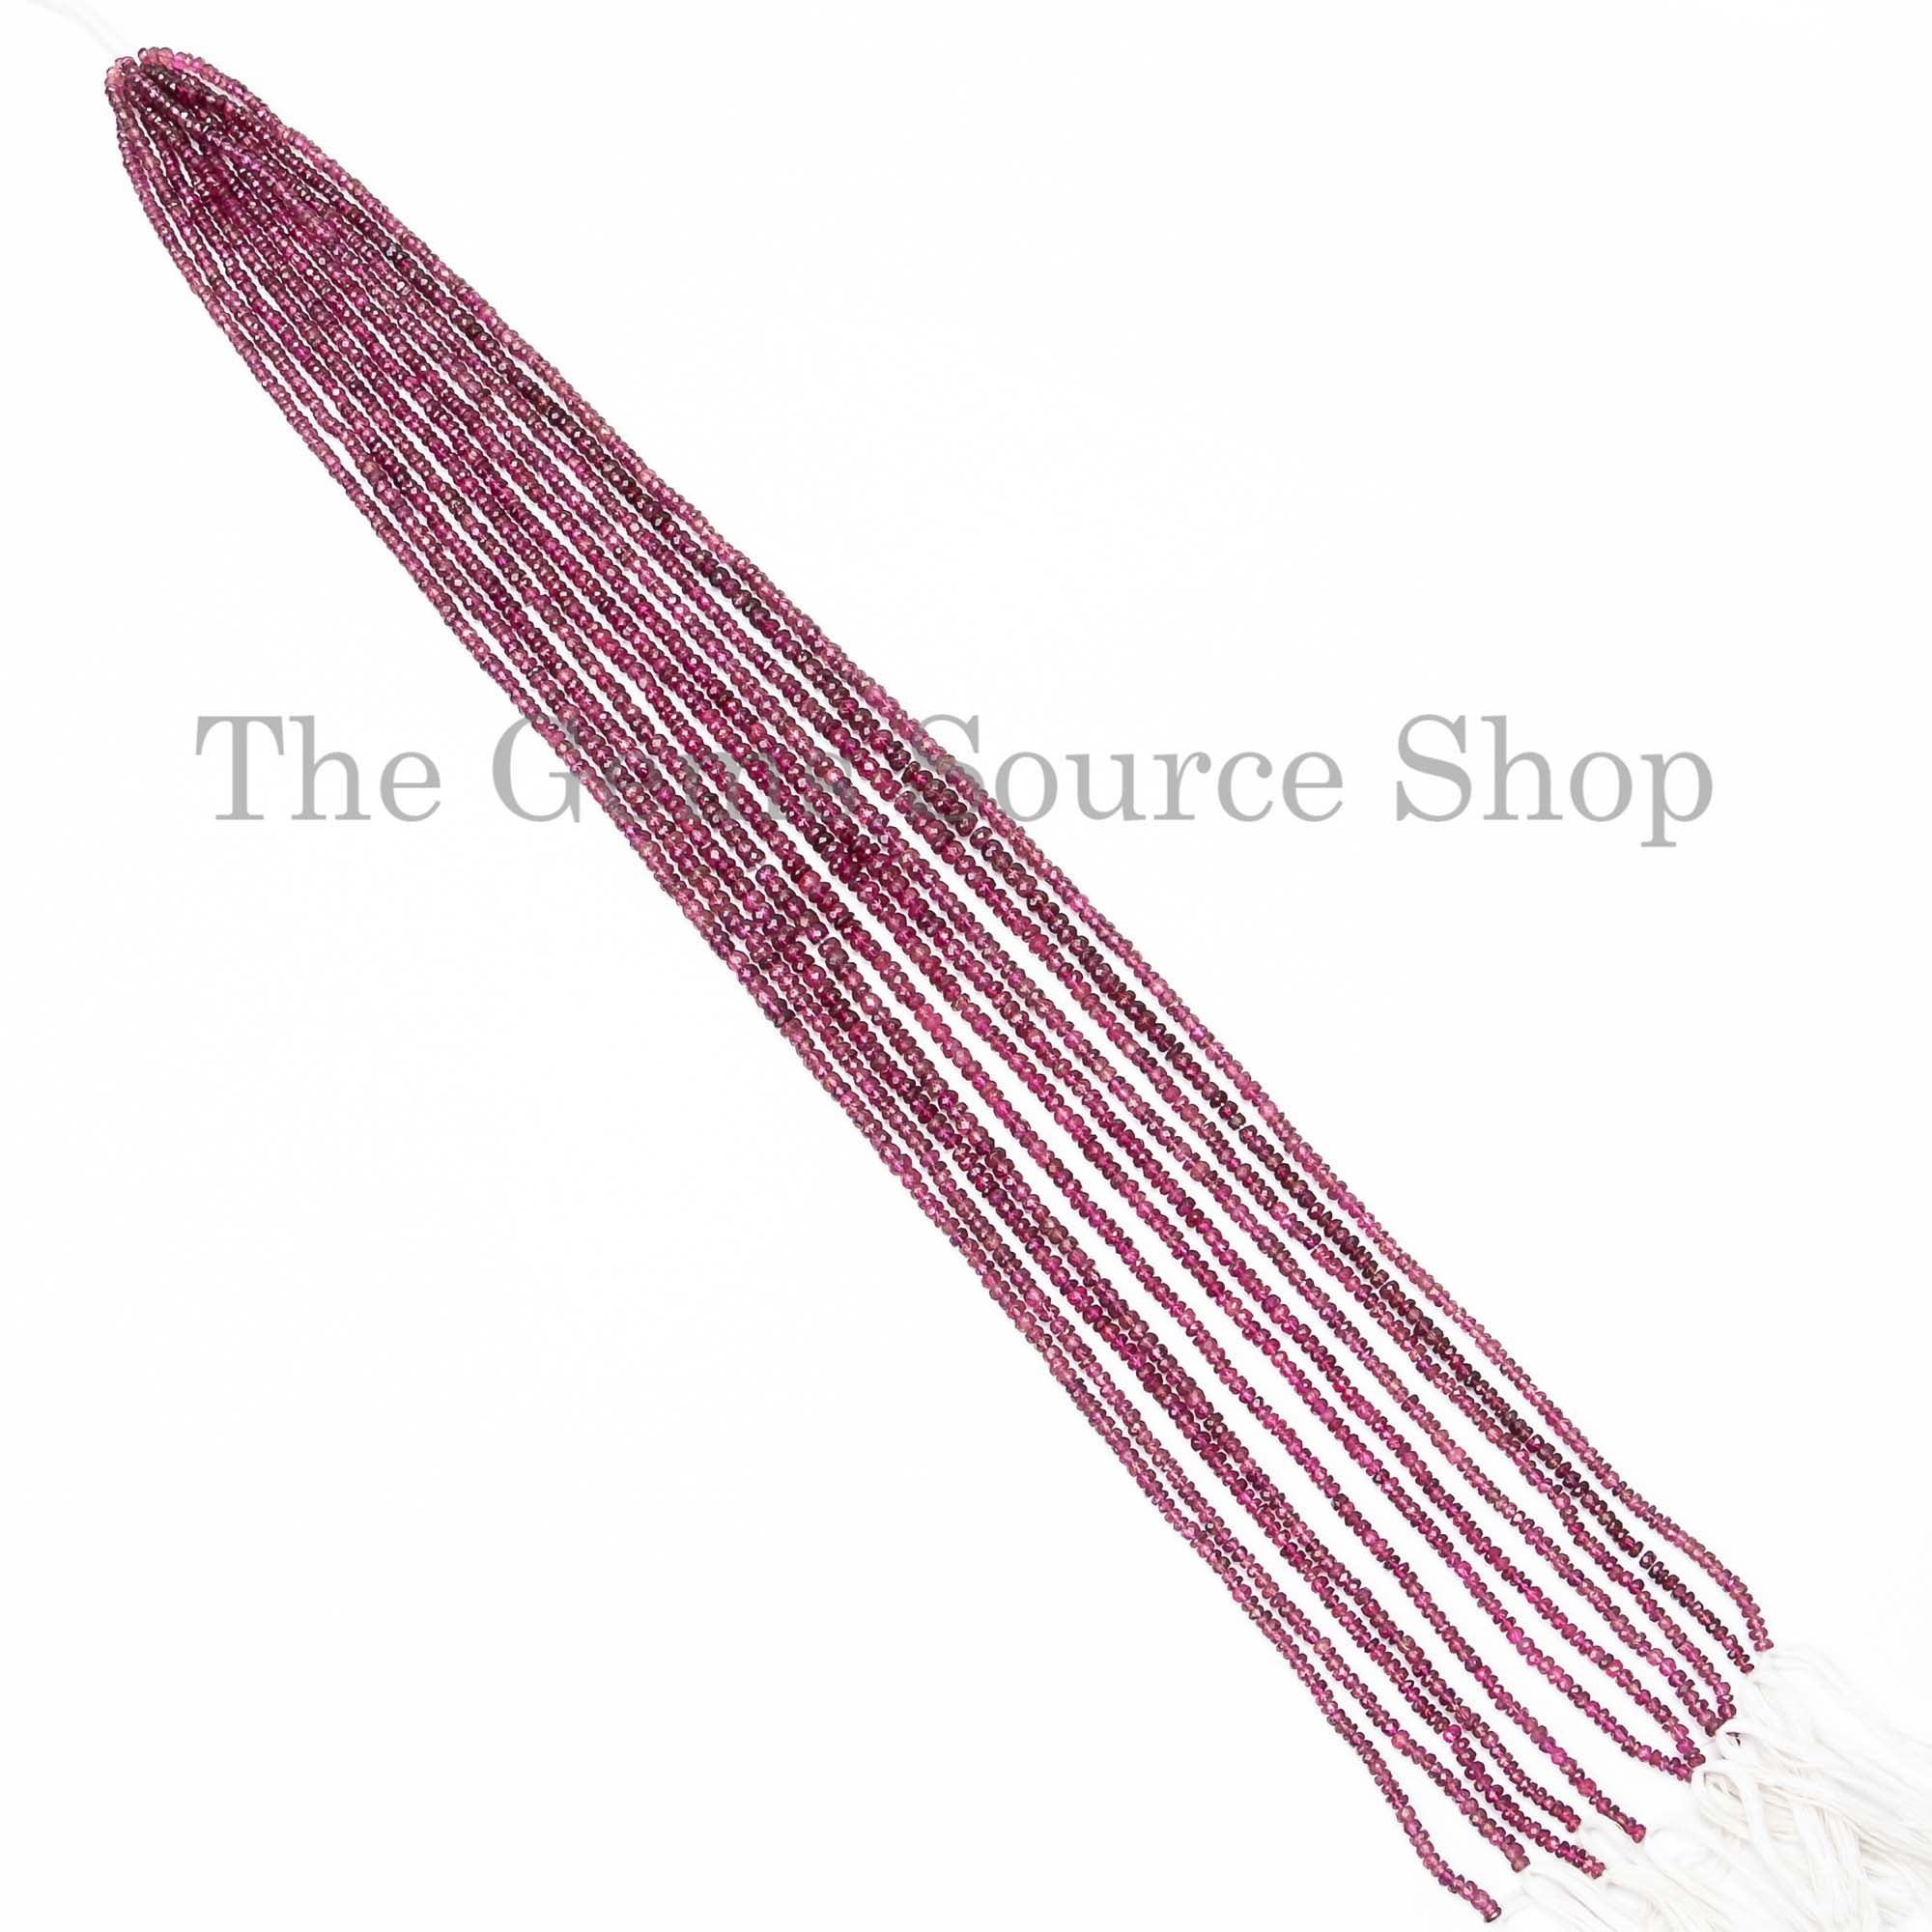 Rubellite Tourmaline Faceted Rondelle Beads, Rubellite Faceted Beads, 3-4.5mm Tourmaline Beads